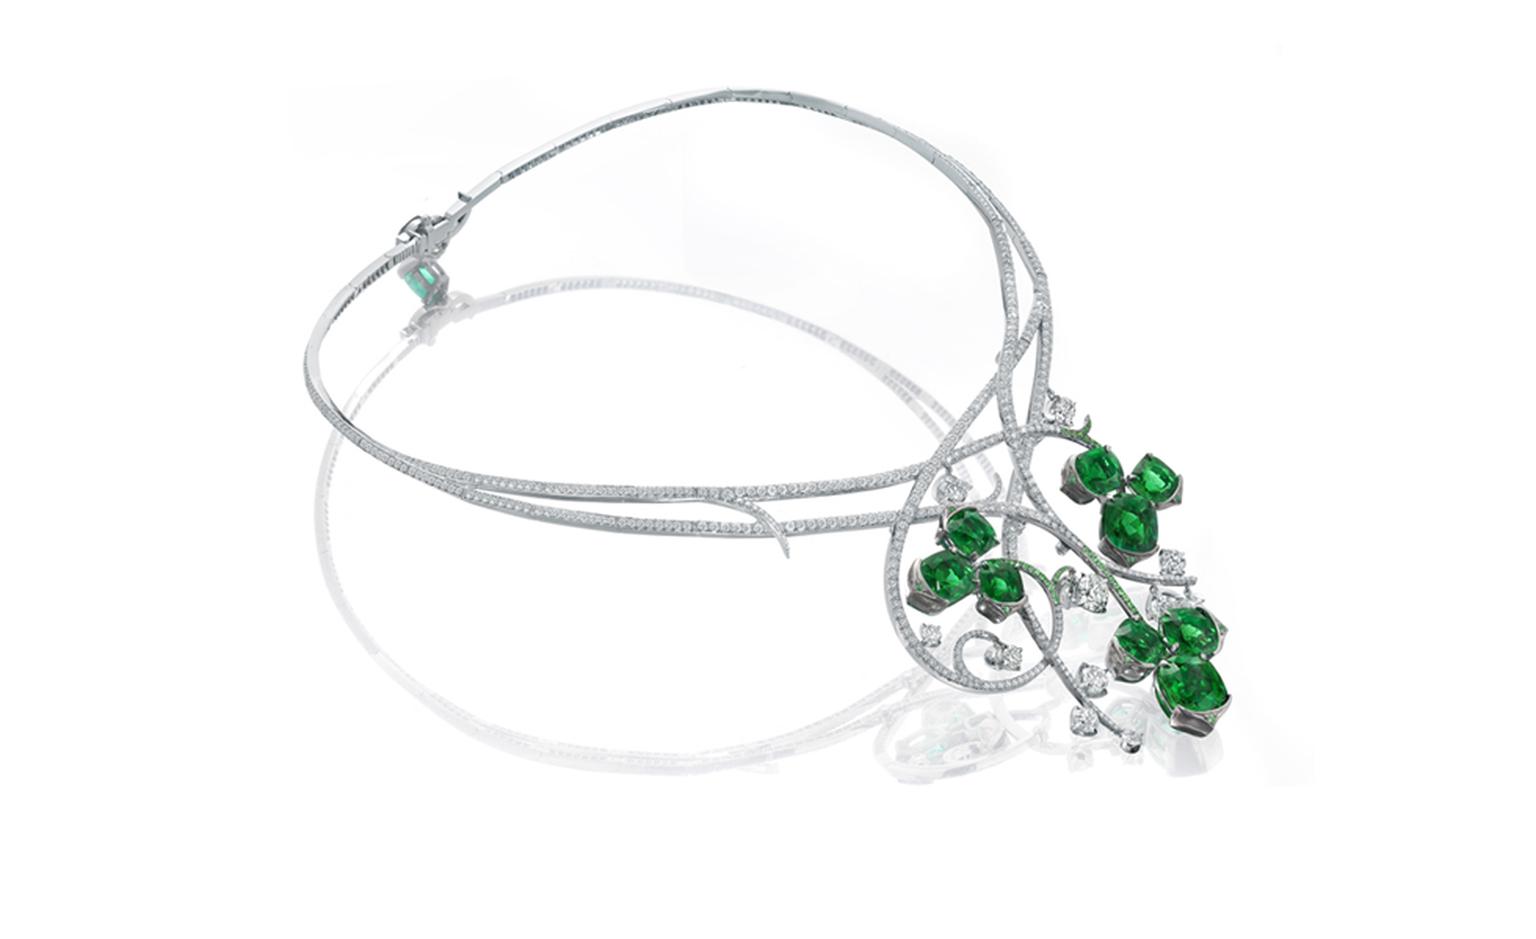 Boodles Iolanthe necklace with diamonds, emeralds and tsavorites created for the launch of the new shop at the Savoy Hotel